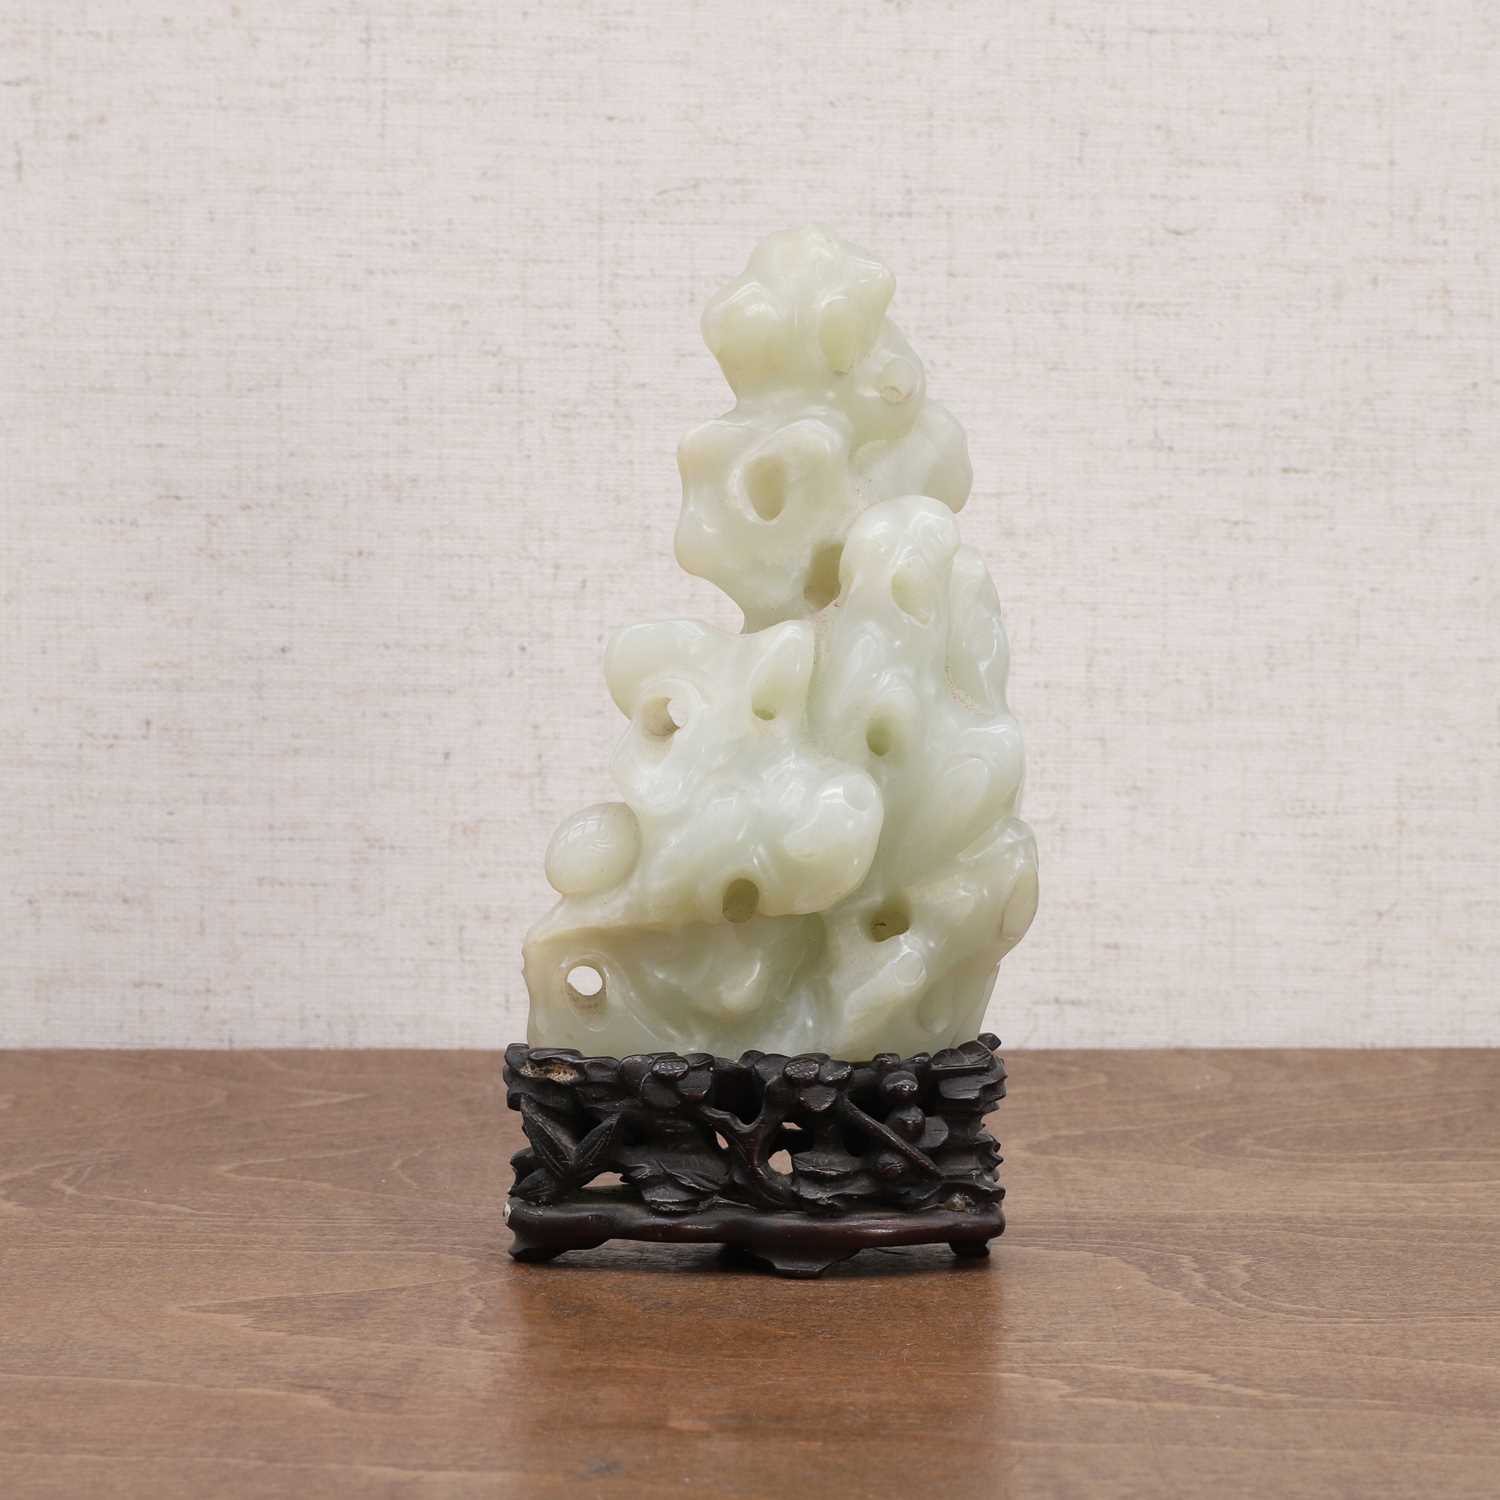 A Chinese jade carving, - Image 3 of 6